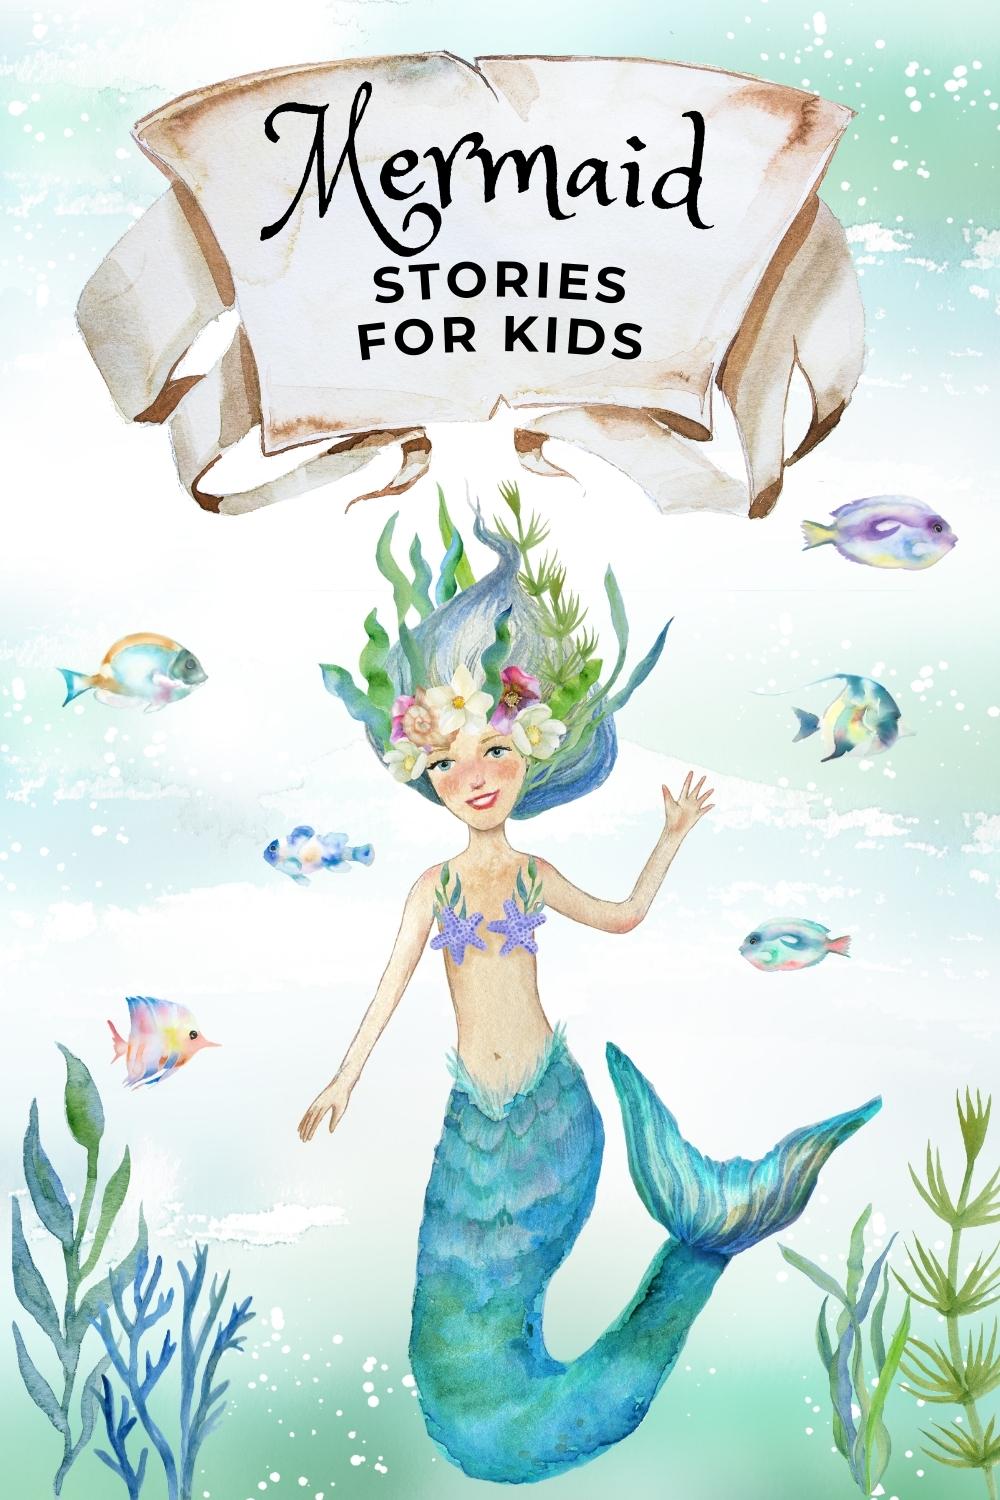 Charming mermaid stories for kids, great for bedtime or anytime!